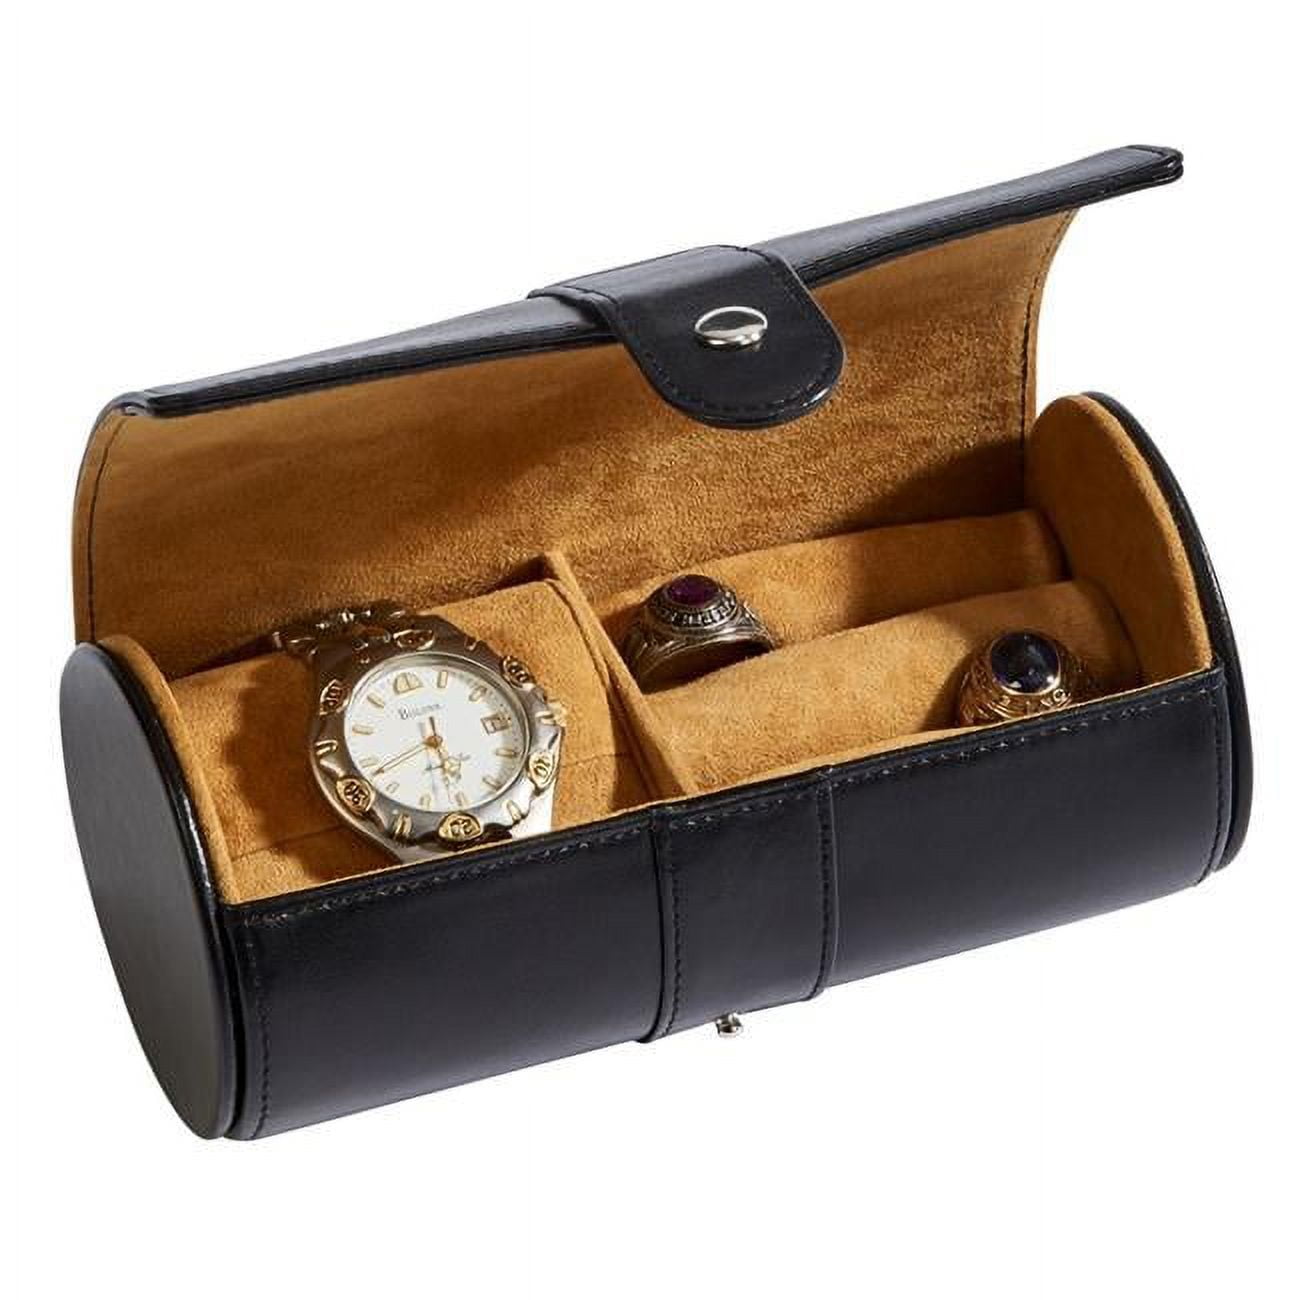 056575 6 X 3 In. Leather Round Jewelry Case, Black